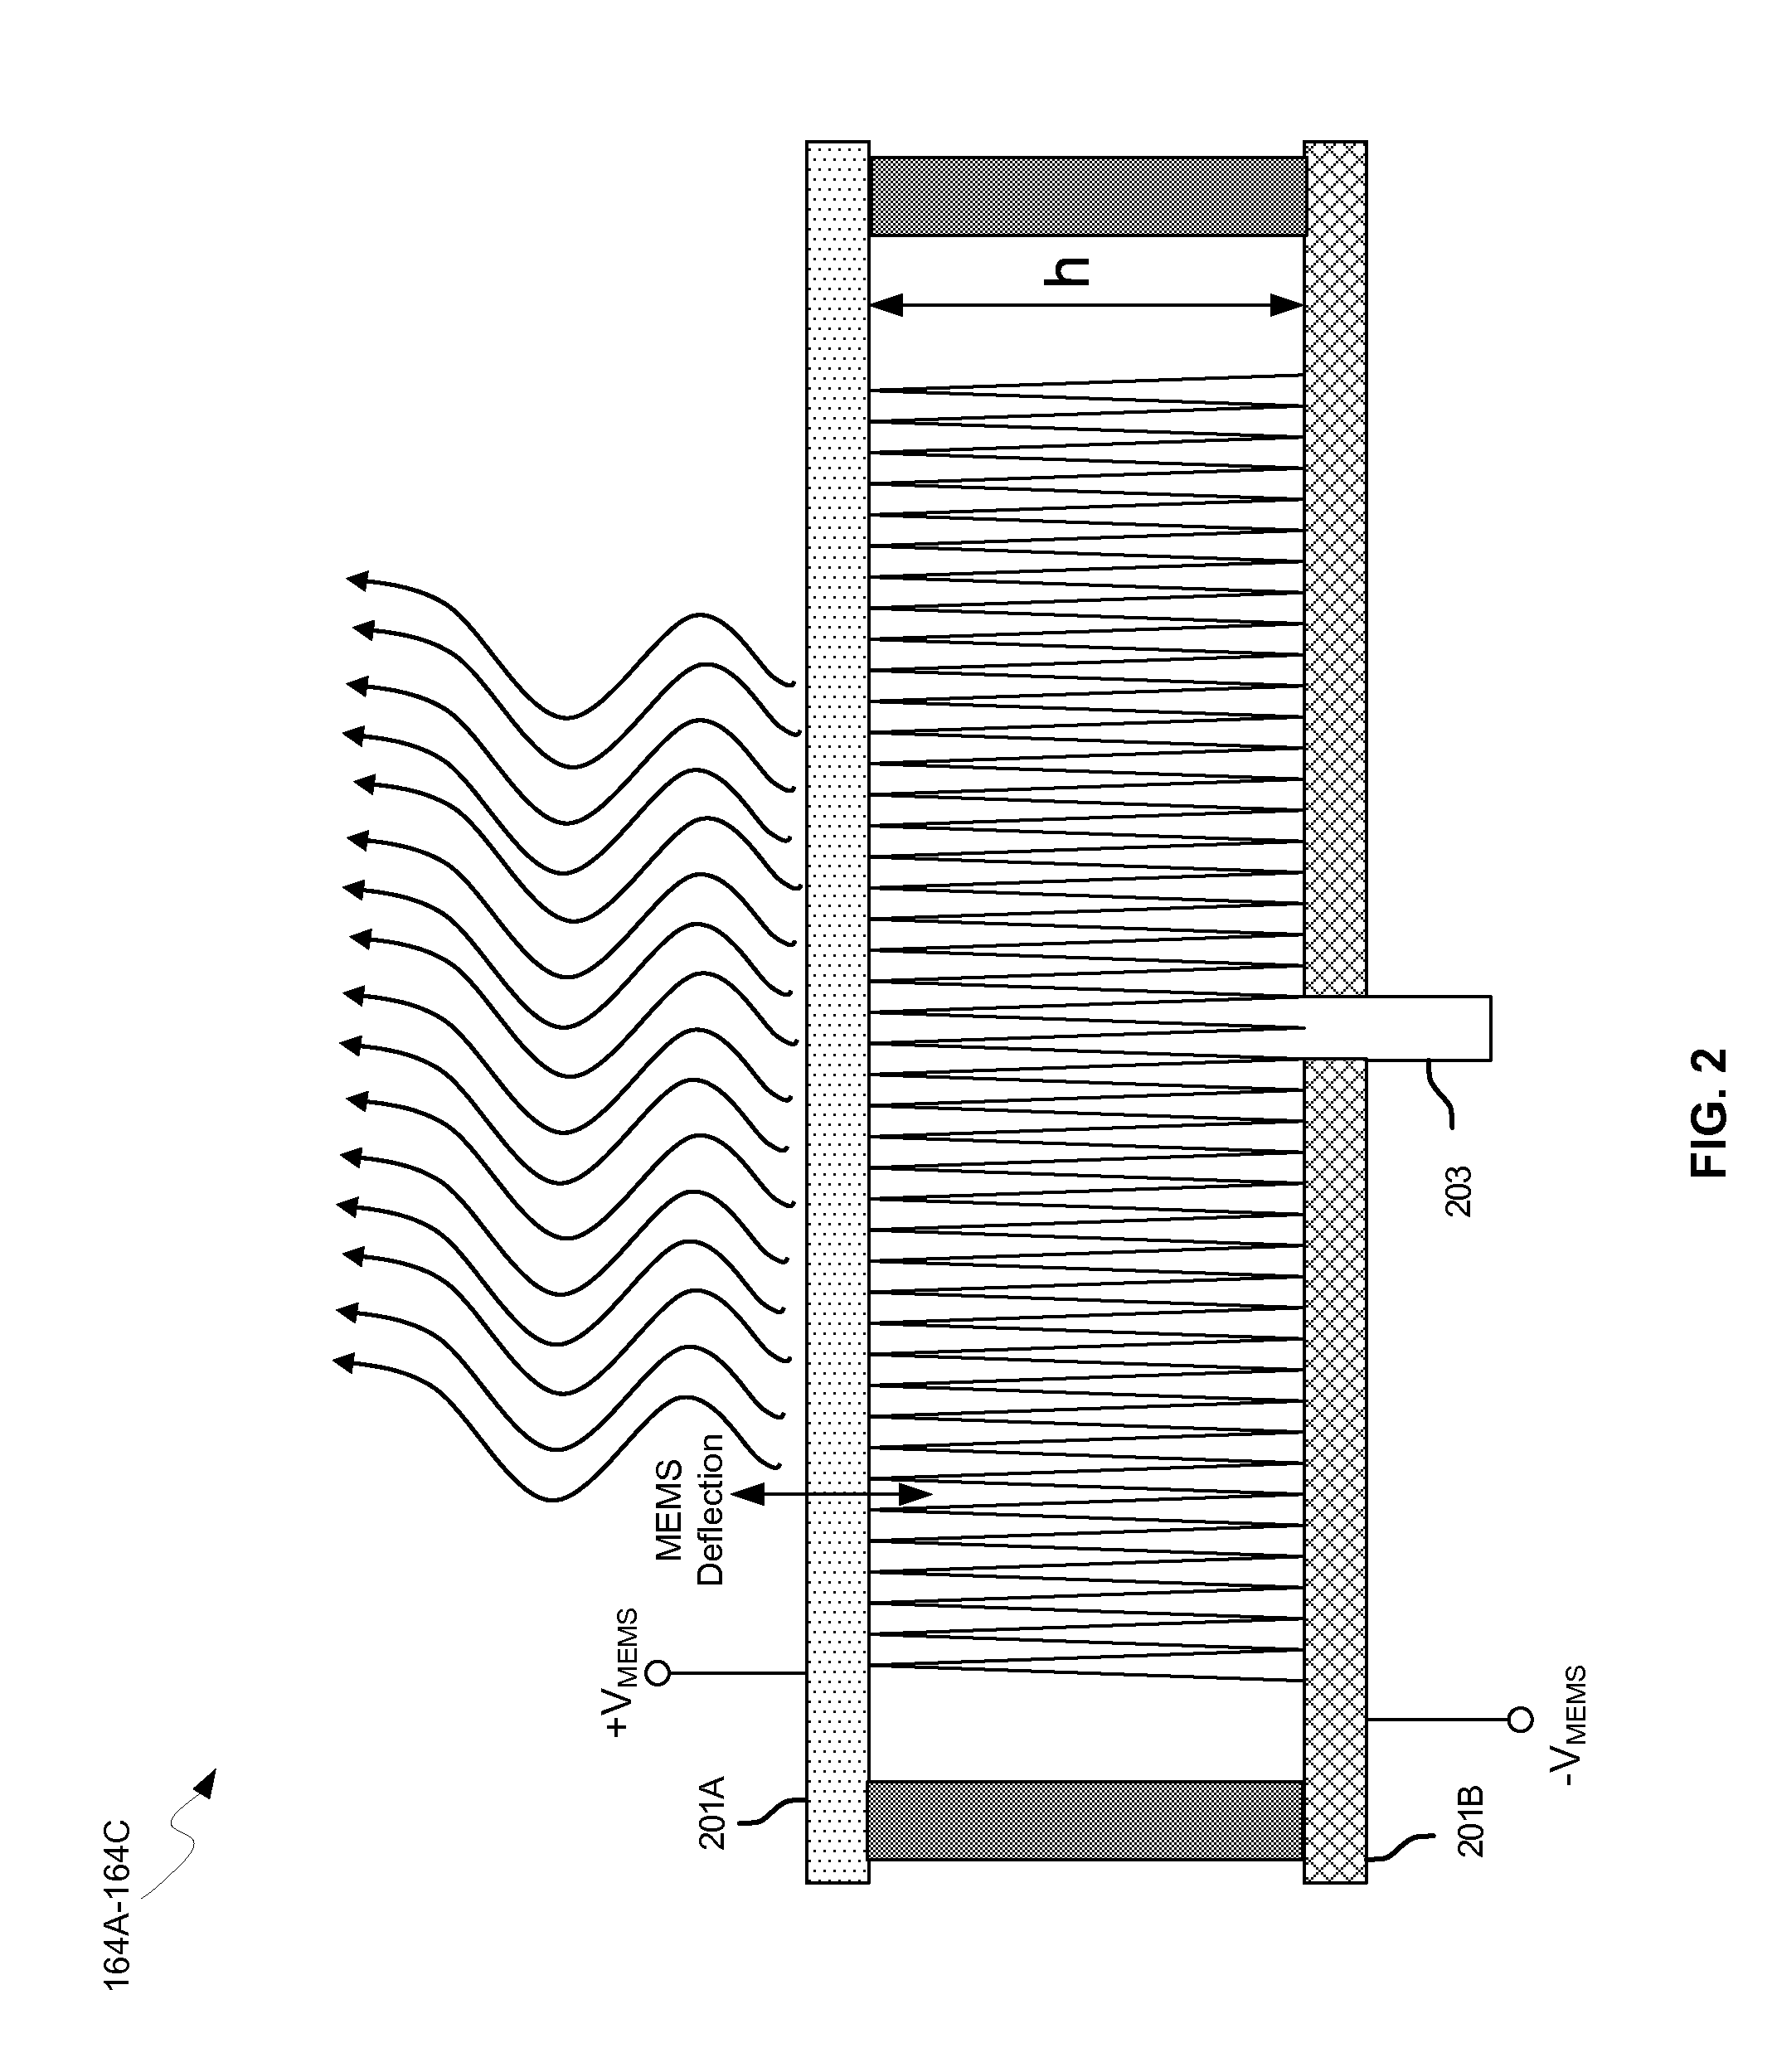 Method and system for communicating via leaky wave antennas within a flip-chip bonded structure